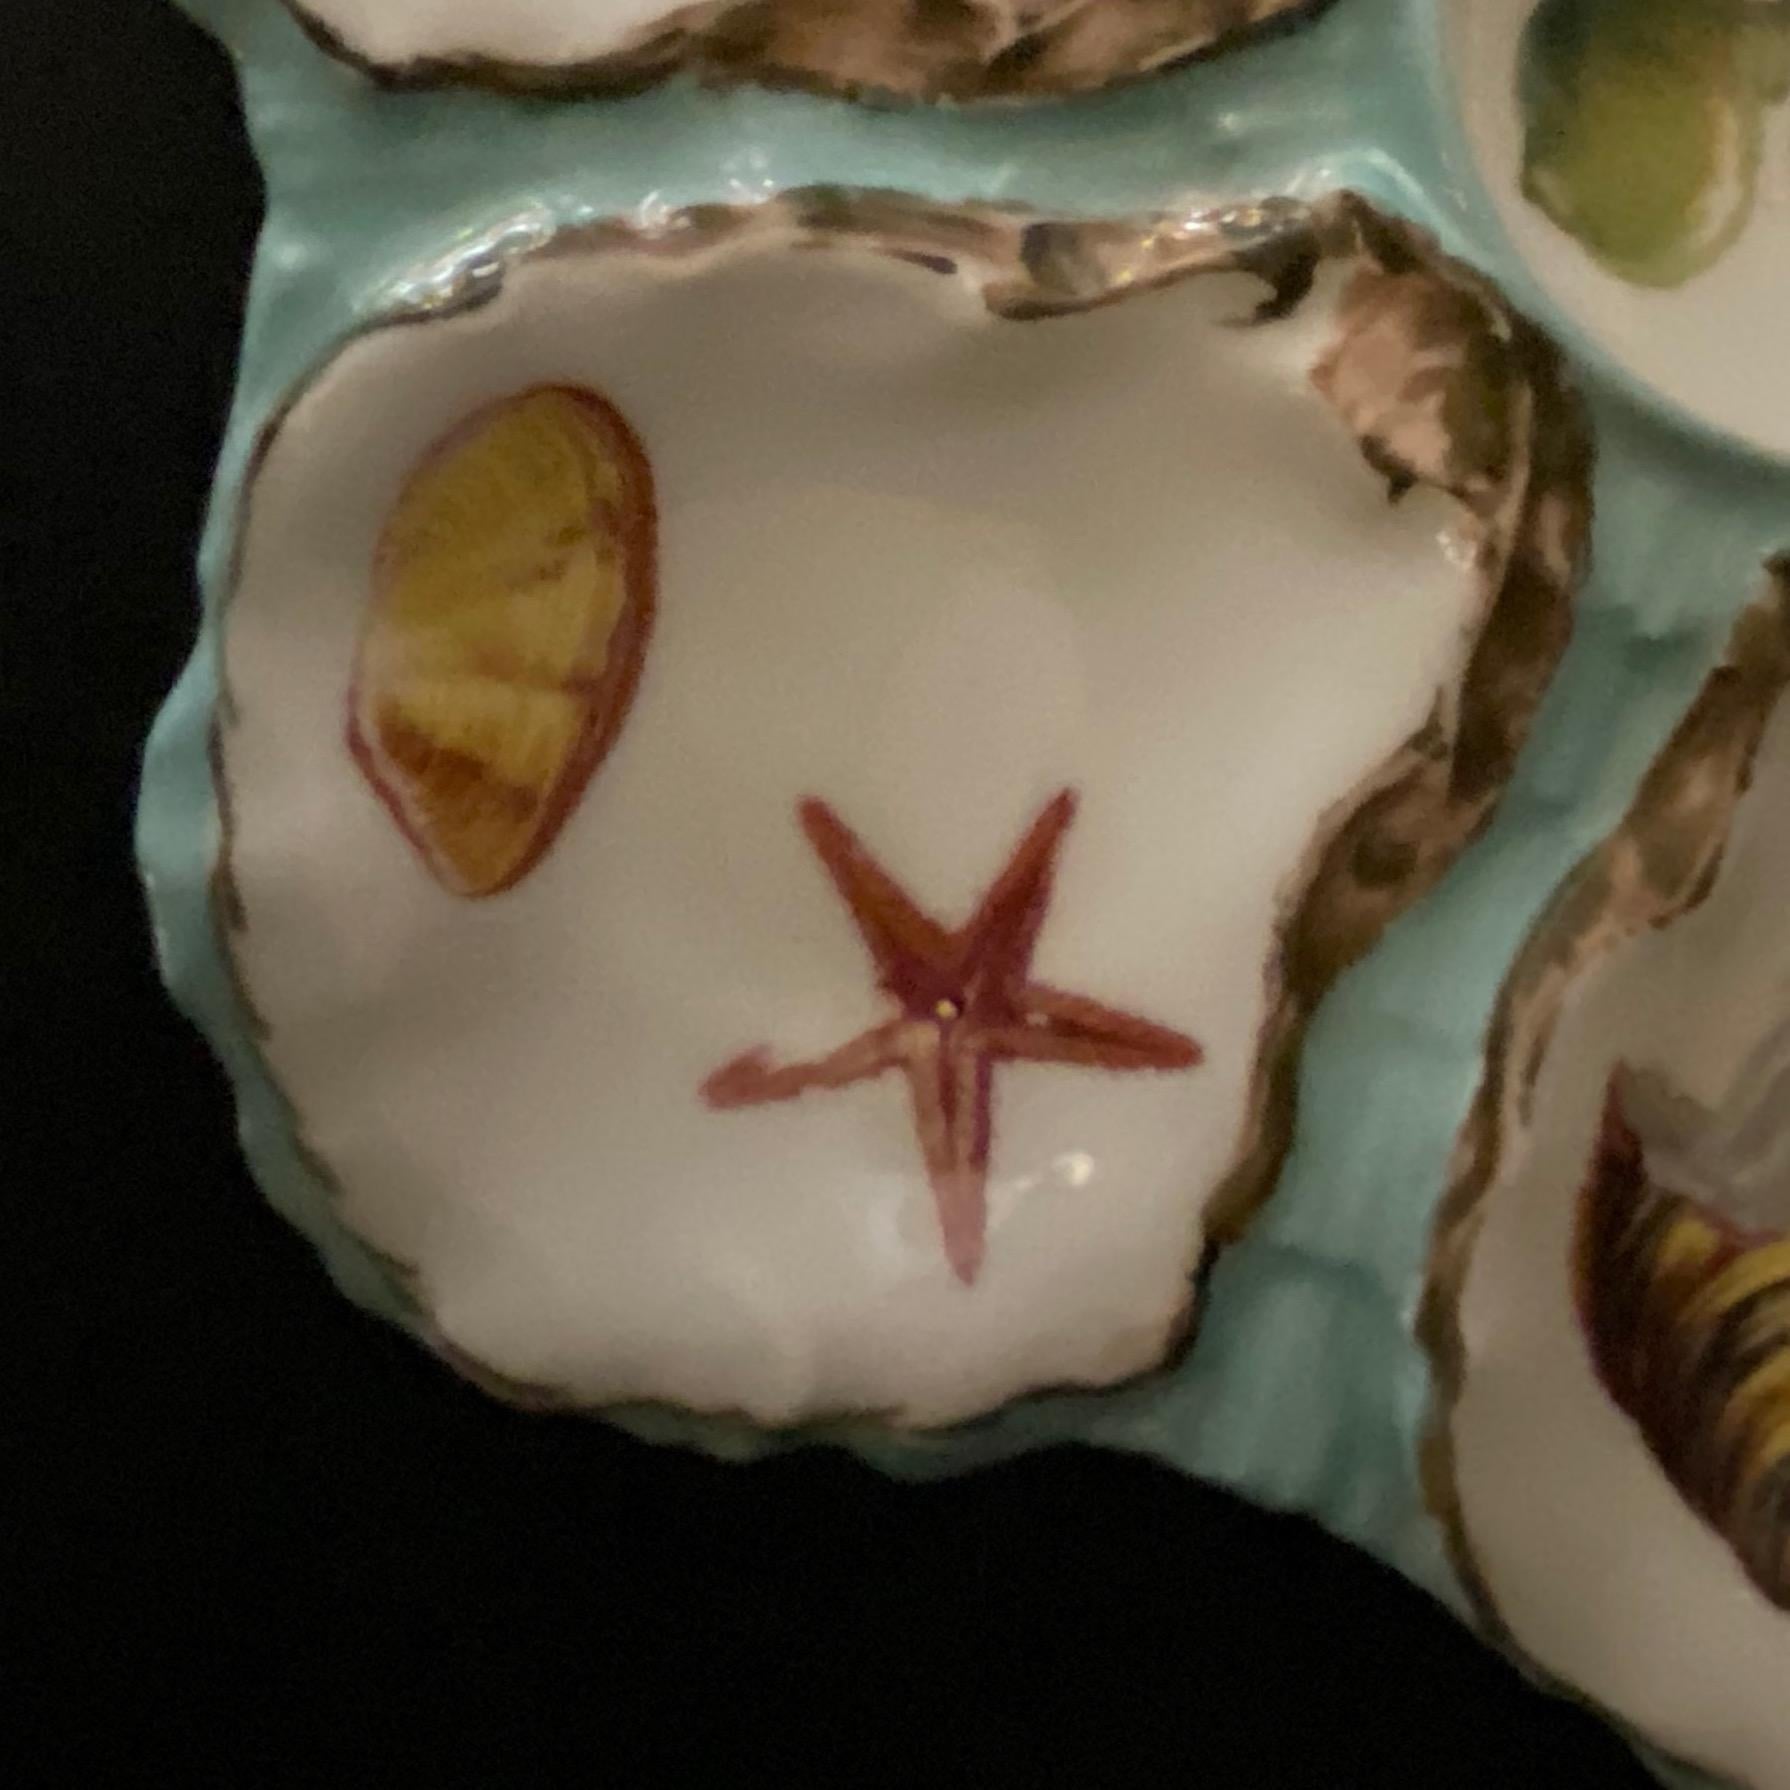 Collector piece, mid-19th century famous Haviland Limoges Porcelain Oyster Plate, with six oyster cradle. The relief of each oyster shells is with refined hand painted details which gives an optical illusion, while the inside of the oysters is